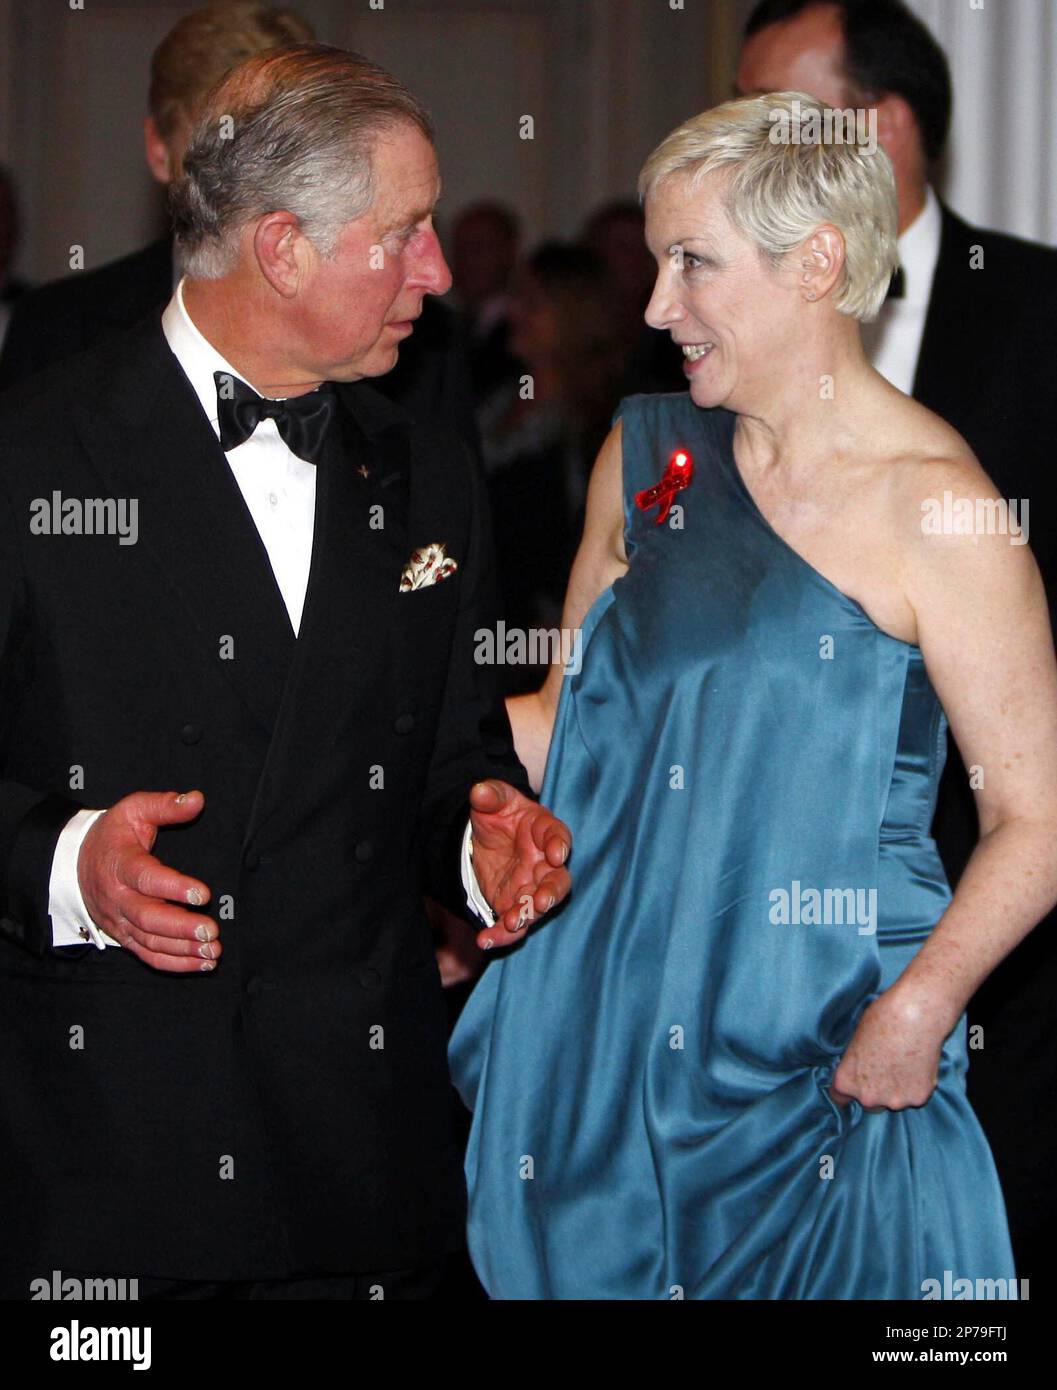 Britain's Prince Charles, the Prince of Wales, meets singer Annie Lennox at  a fund-raising gala dinner supported by representatives from Zimbabwean  charities at Claridge's in central London Tuesday, Feb. 8, 2011. (AP